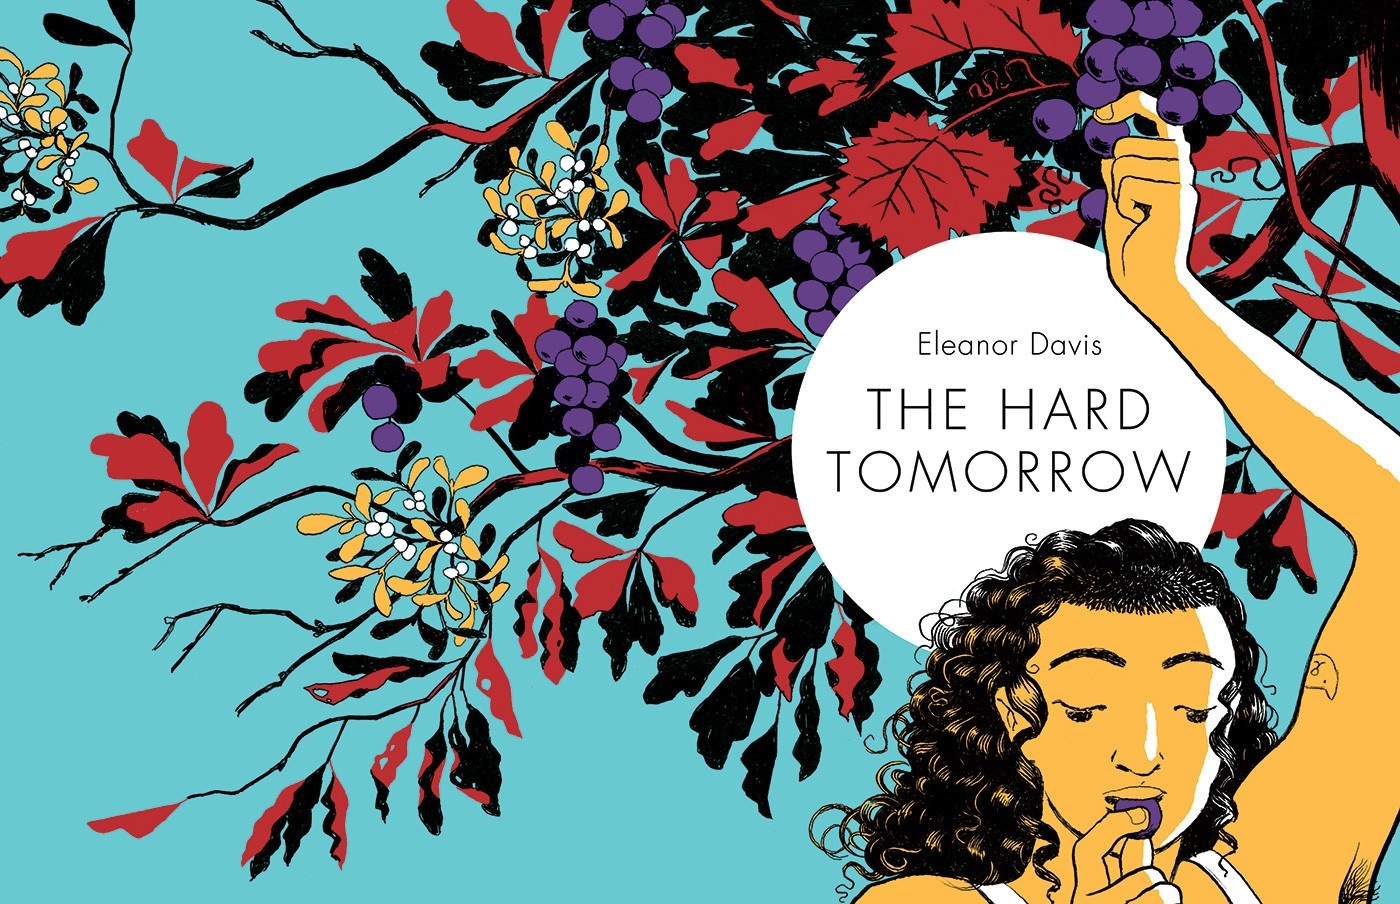 Illustrated book cover of The Hard Tomorrow by Eleanor Davis, showing an individual with long curly hair, arm raised in the air, with images of red and gold flowers and purple grapes. 